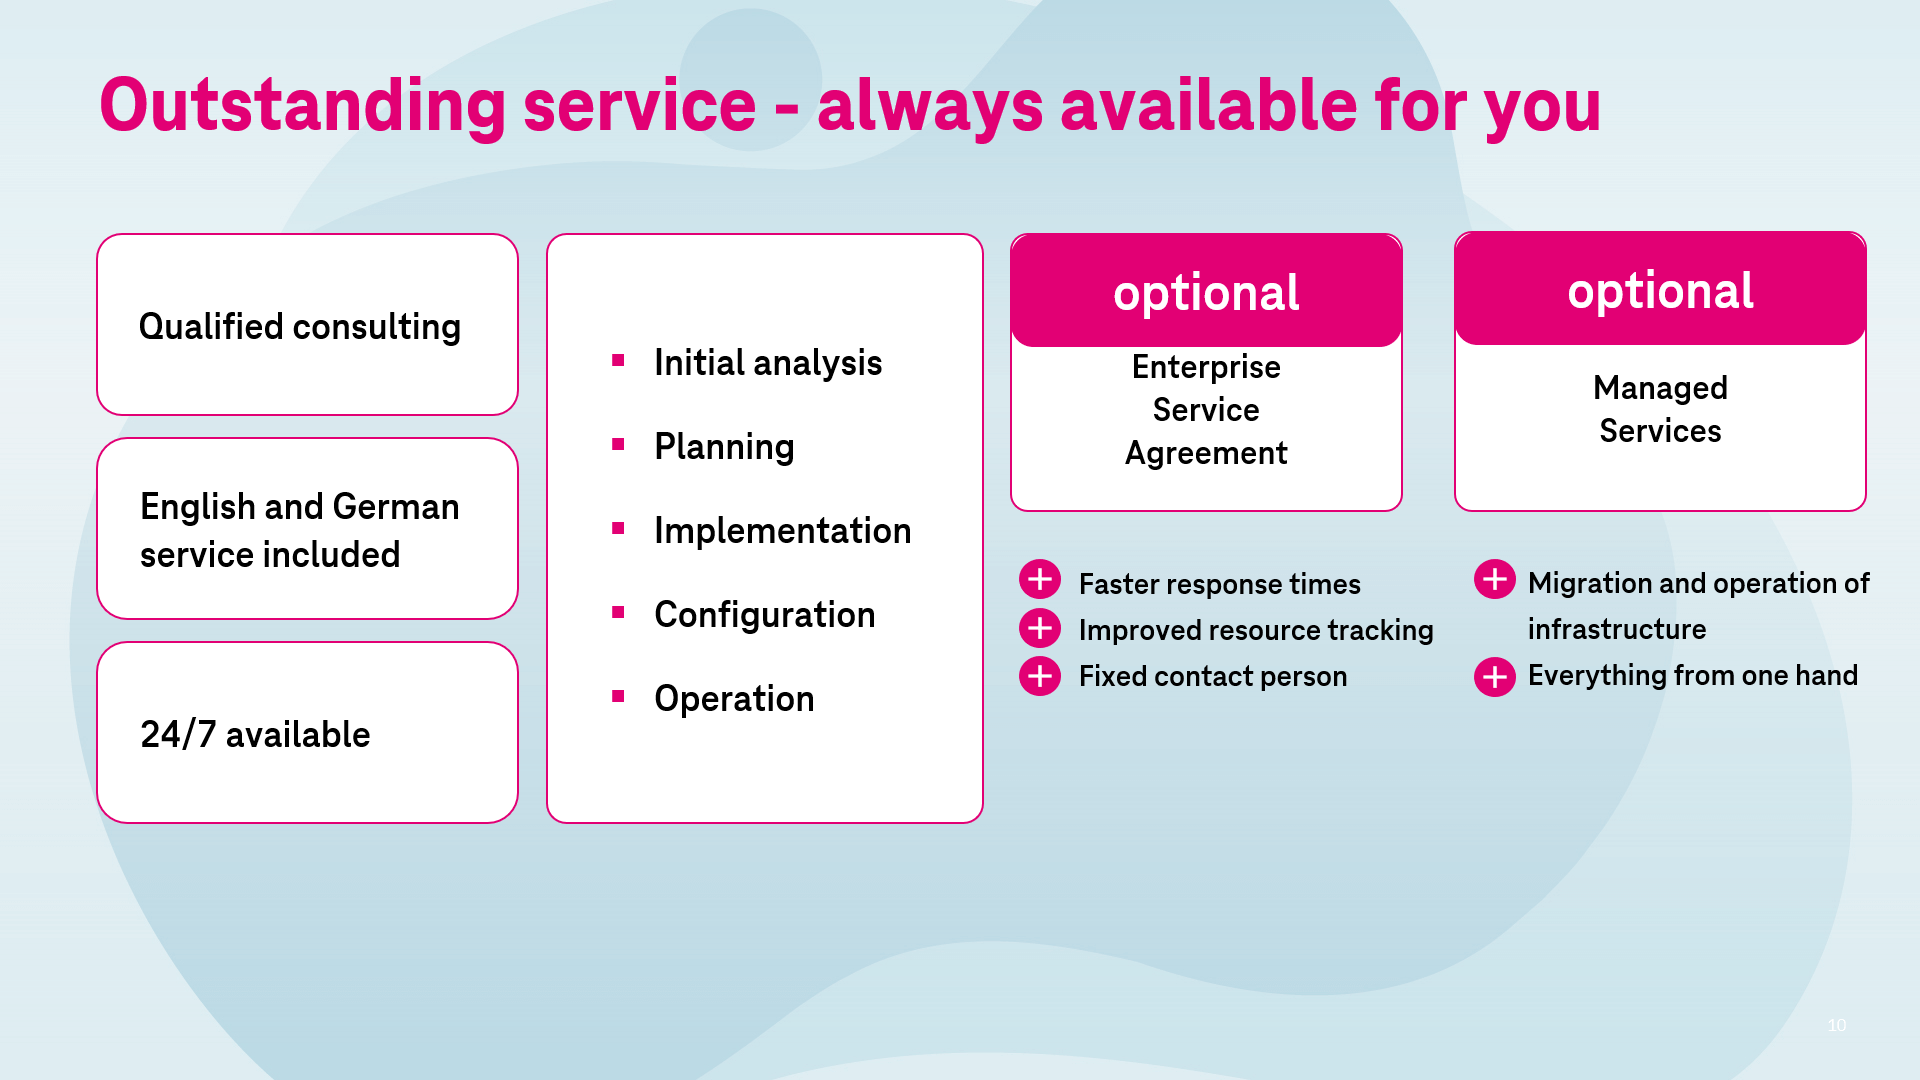 Infographic with benefits of the Open Telekom Cloud Service